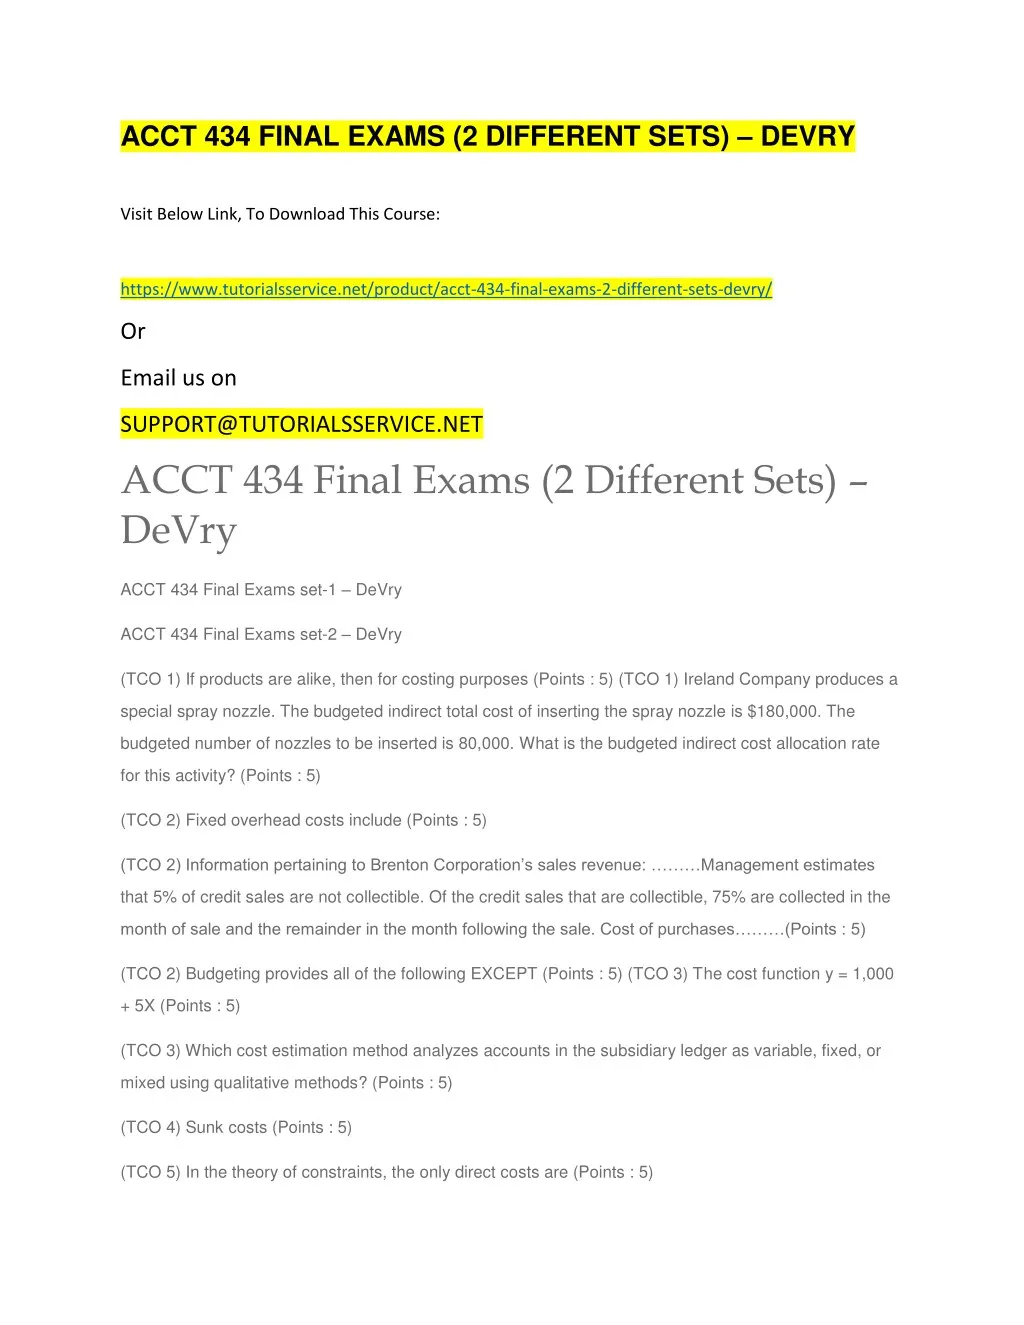 acct 434 final exams 2 different sets devry